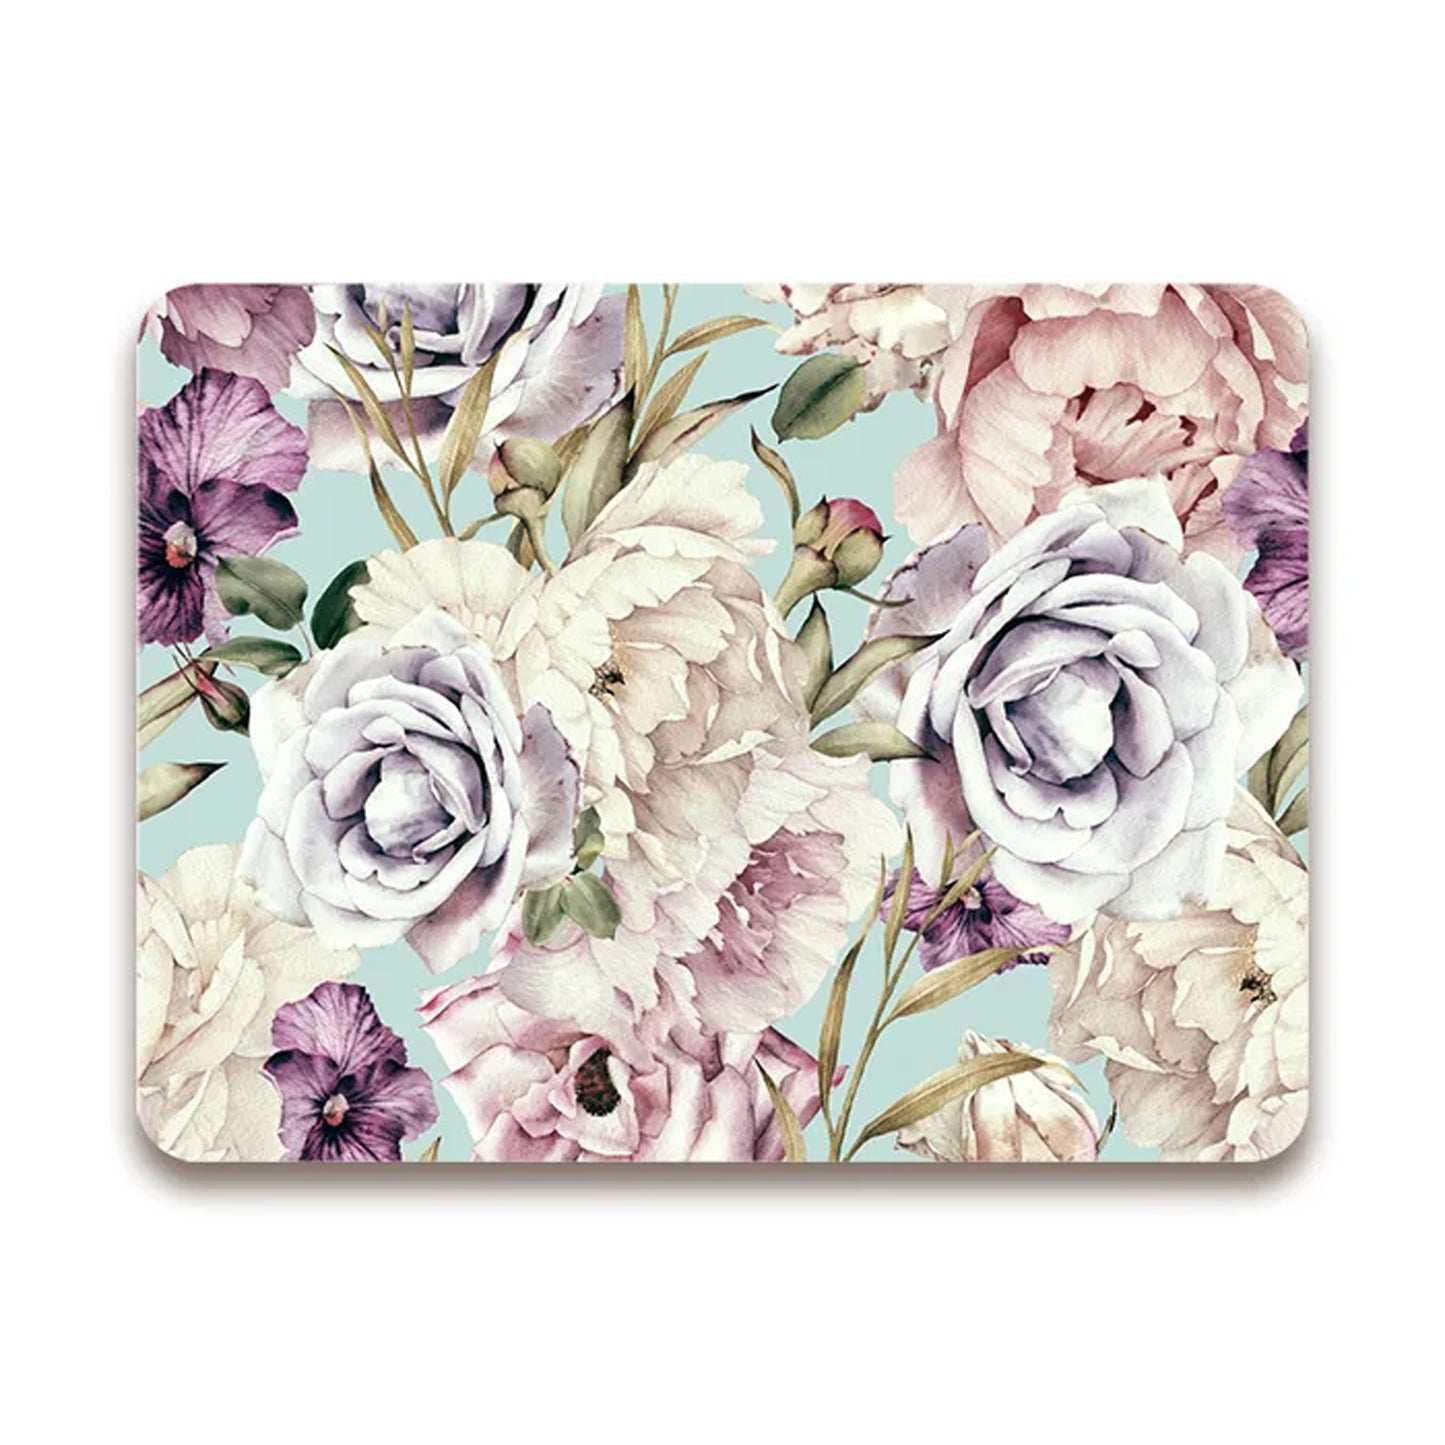 Blooming Blossoms Tablemats | TM 099 (set of 2)